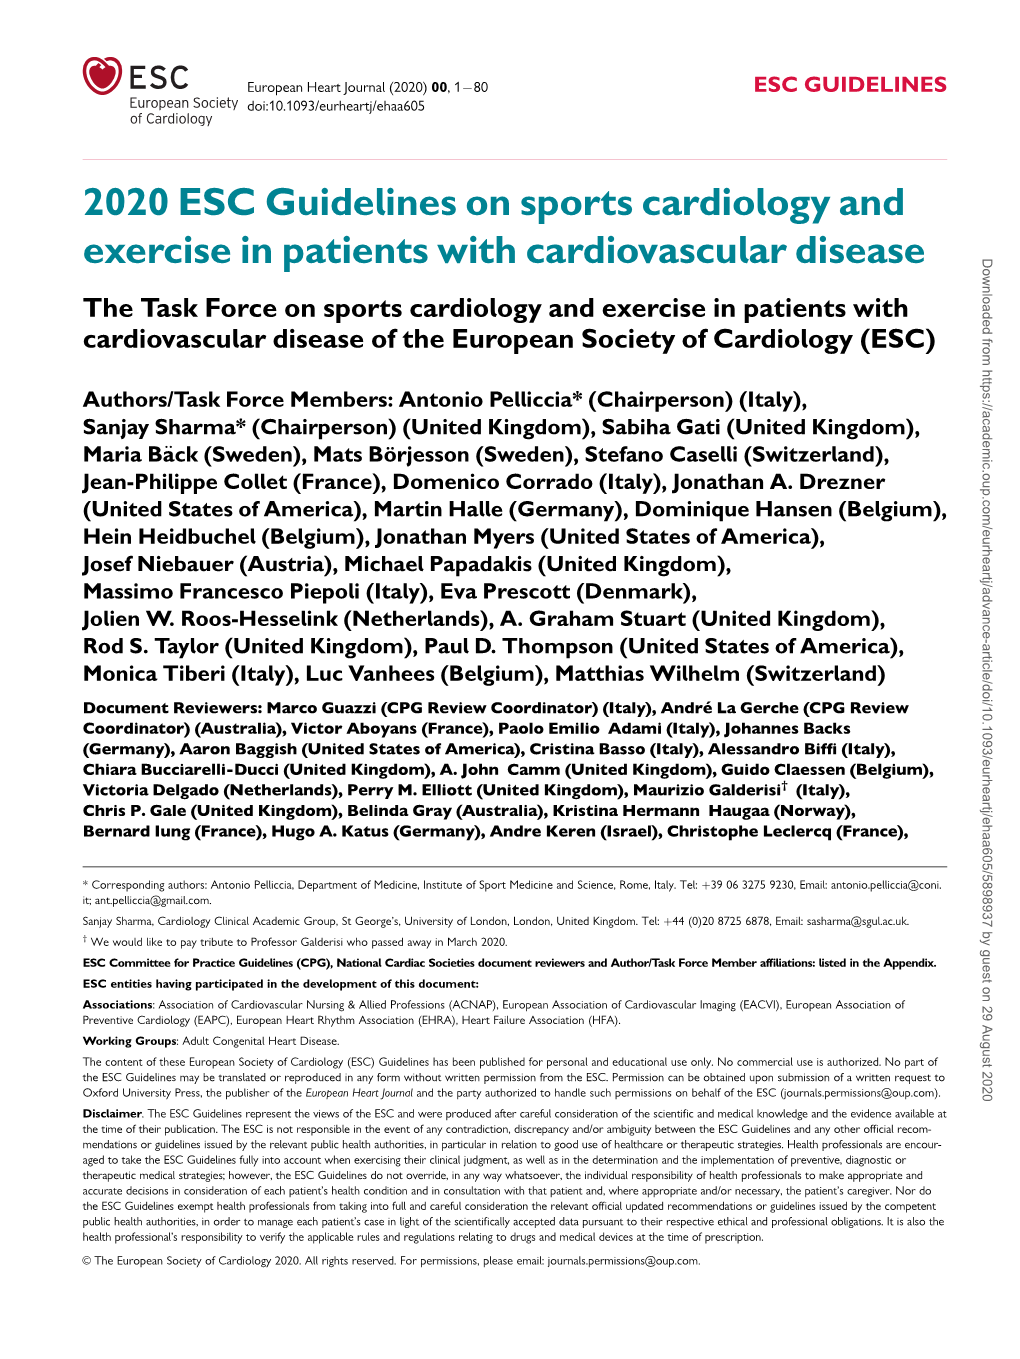 2020 ESC Guidelines on Sports Cardiology and Exercise in Patients